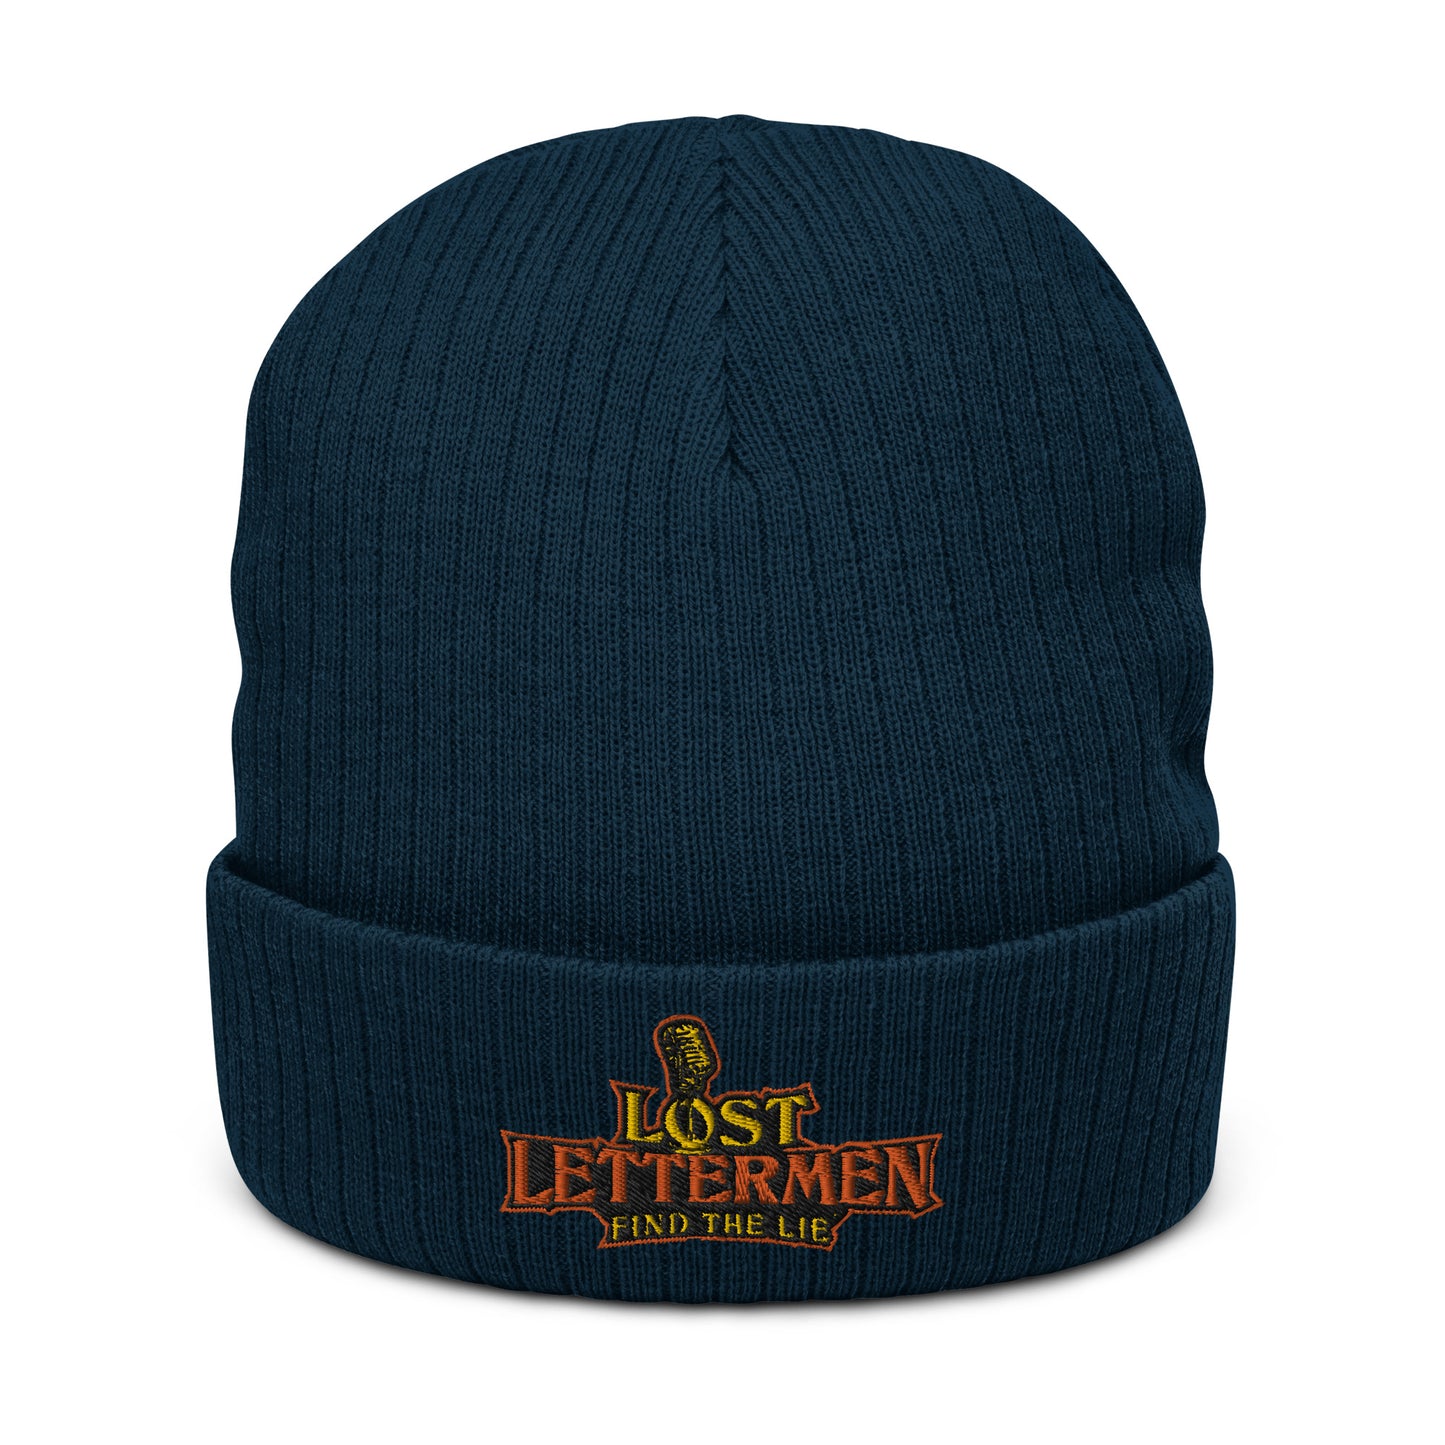 Lost Letterman Embroidered Ribbed knit beanie